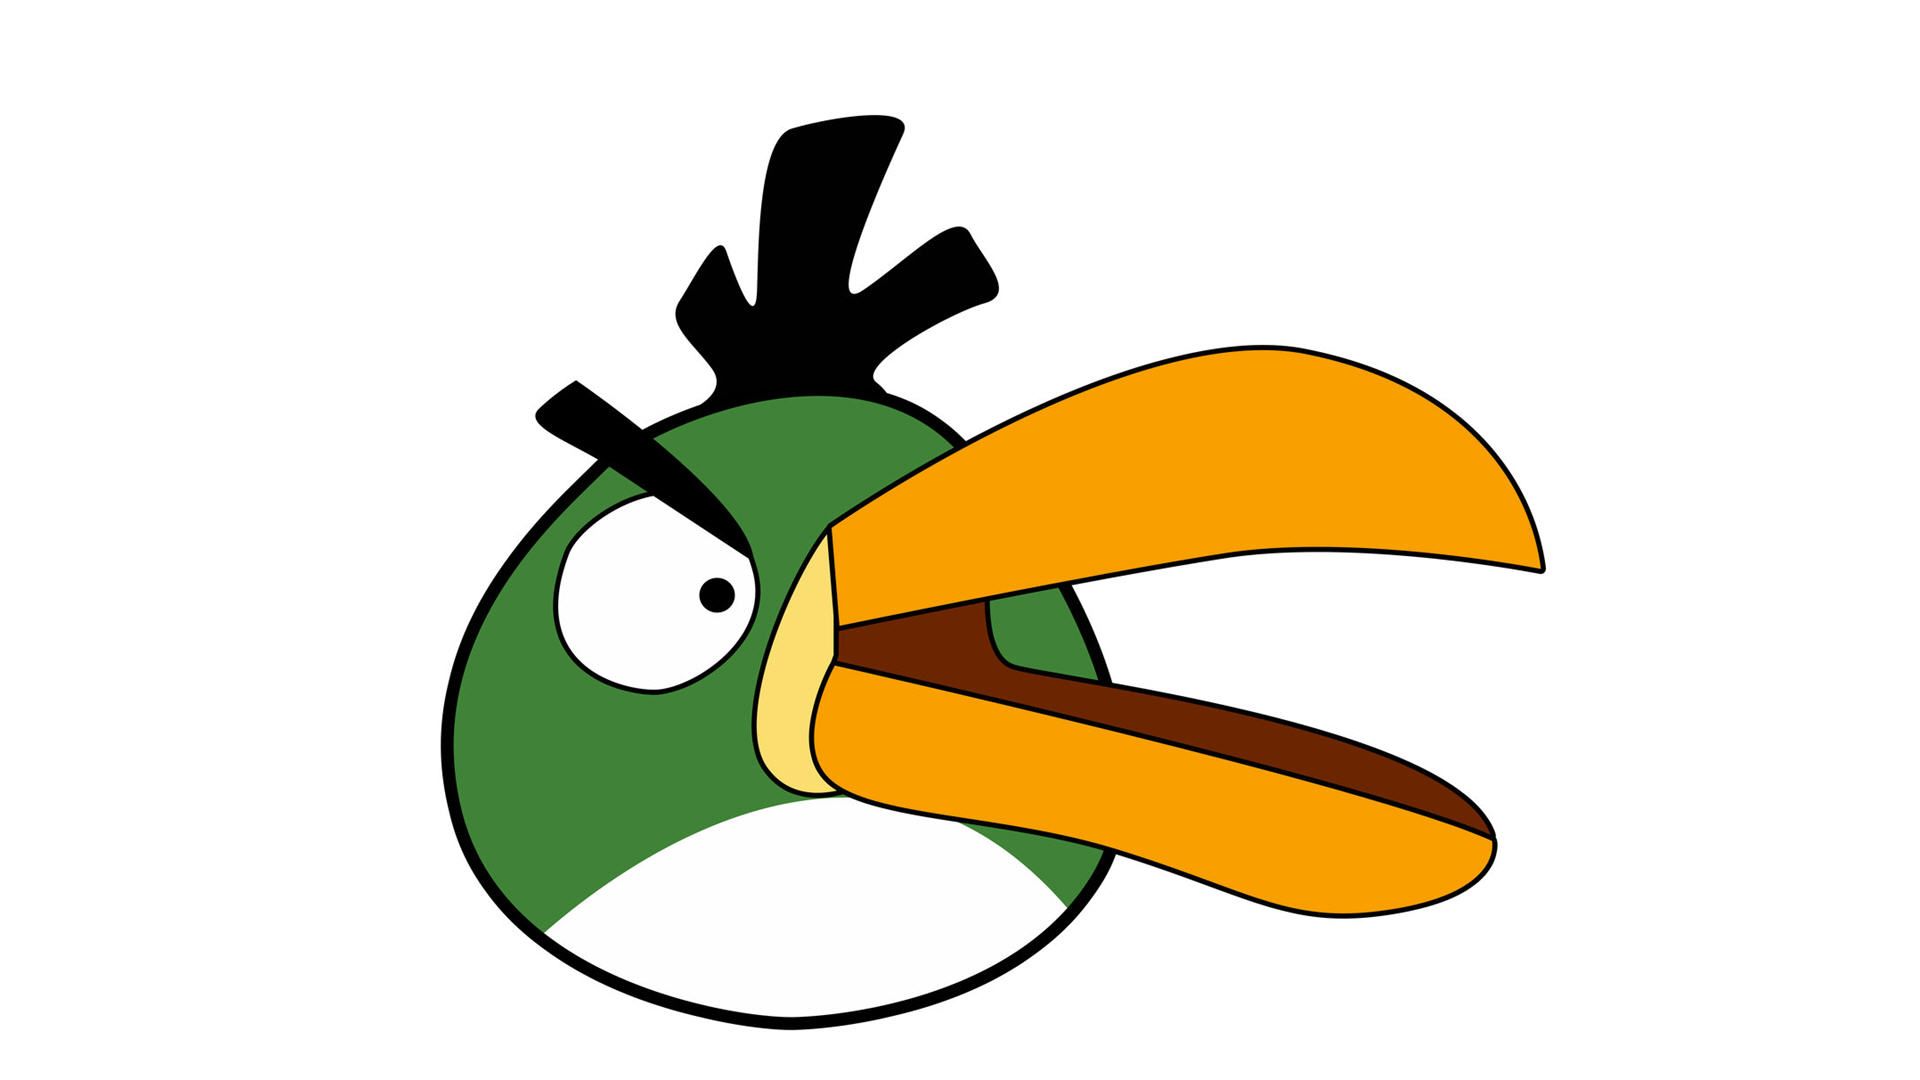 Green Angry Bird Wallpaper Download - Angry Birds Game Hal , HD Wallpaper & Backgrounds